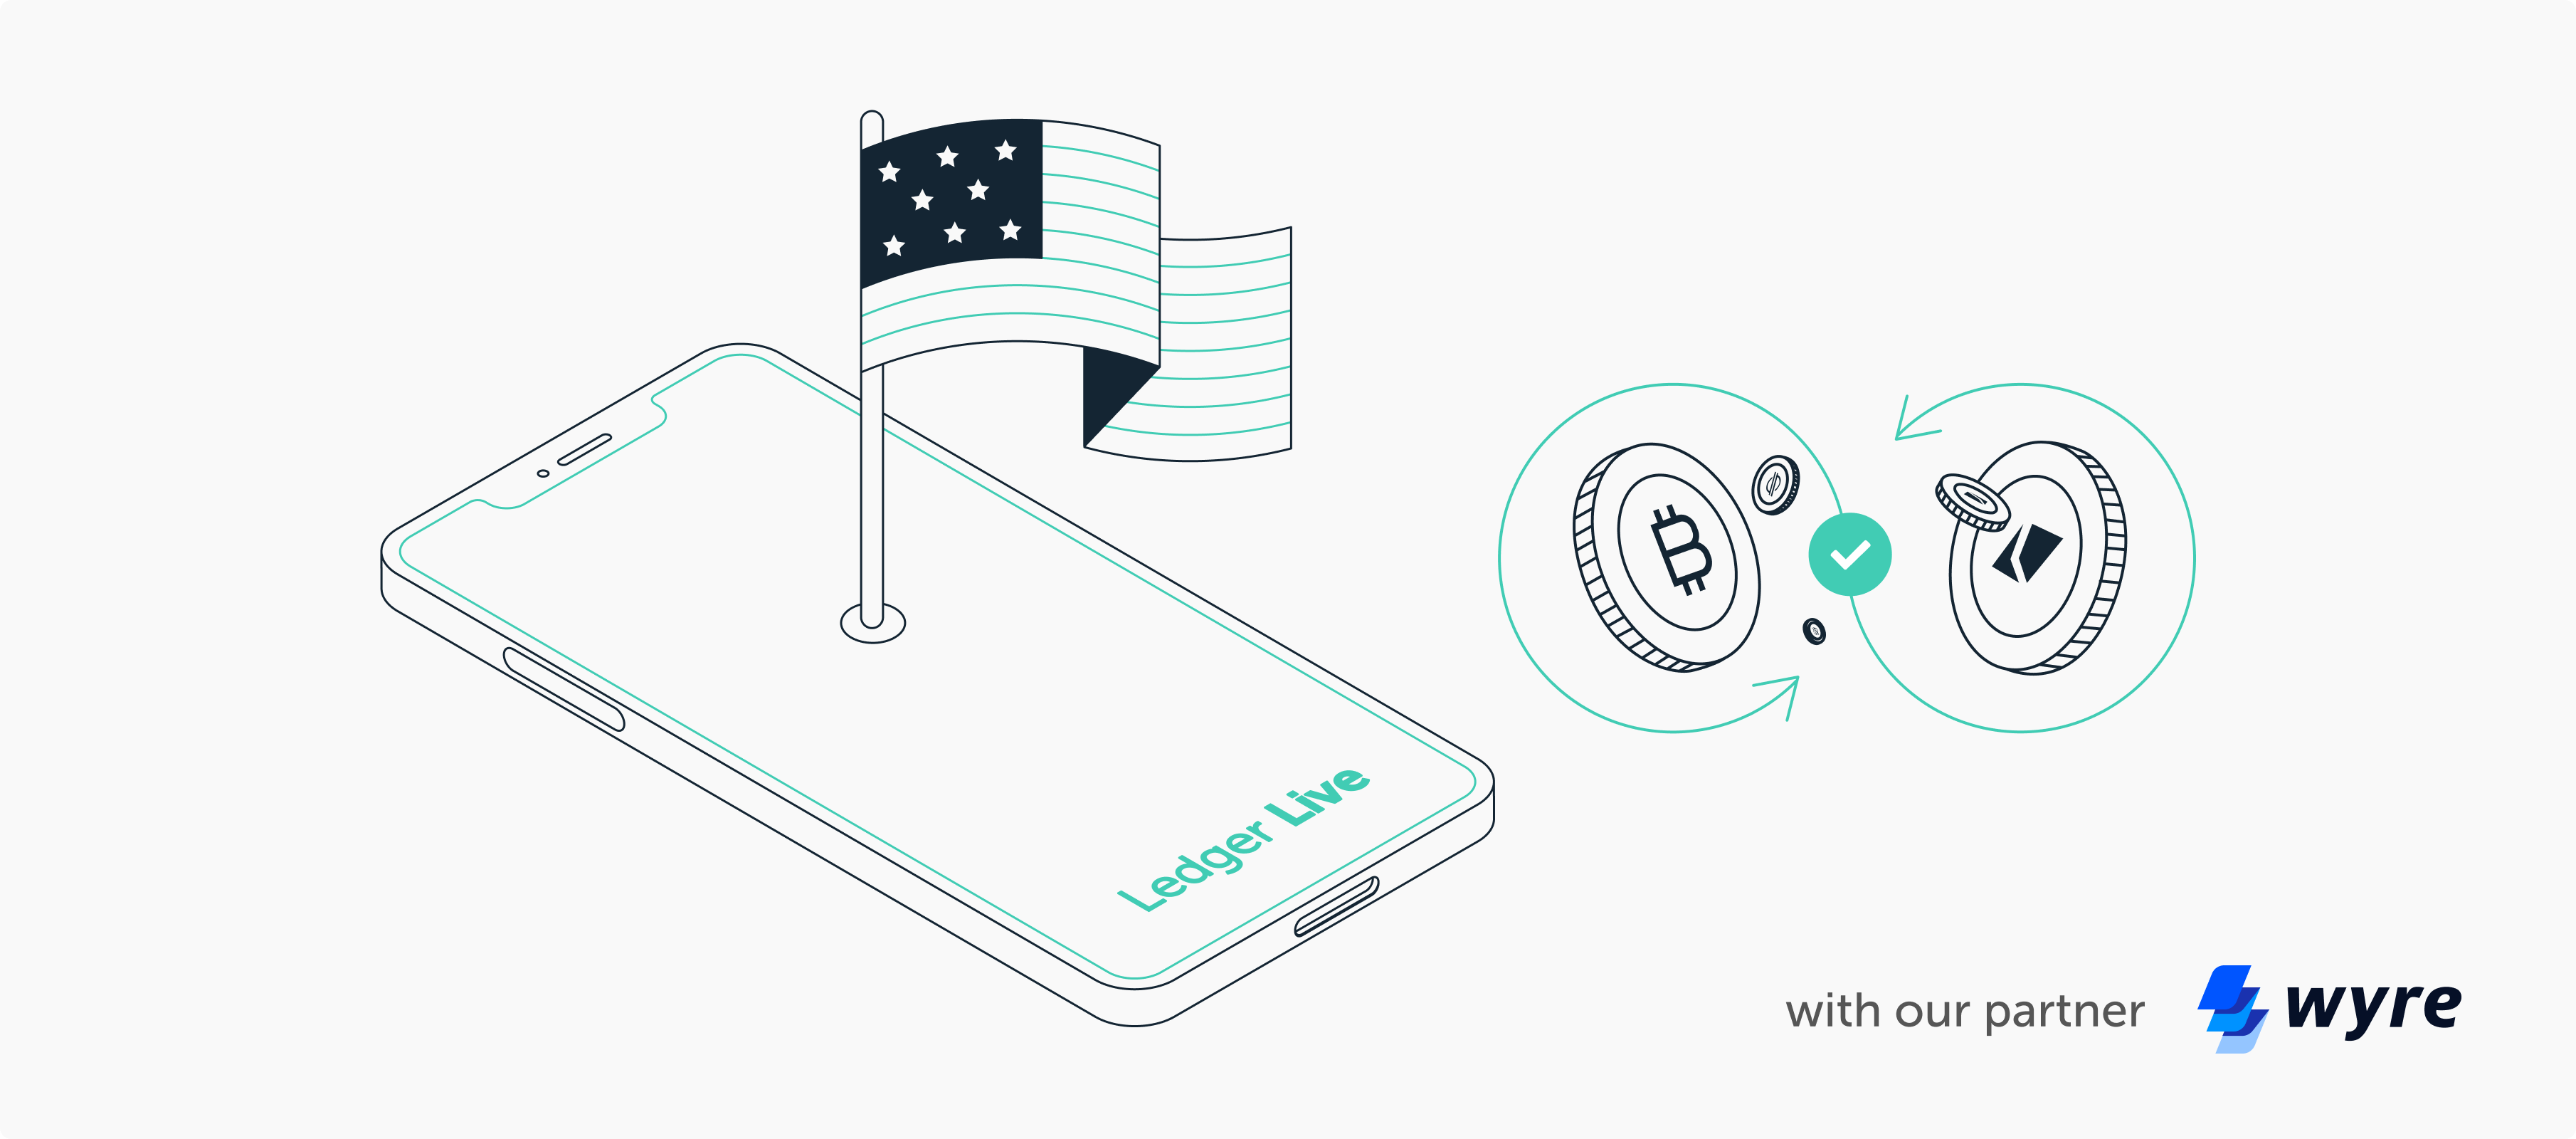 US investors can now exchange their digital assets on Ledger with Wyre